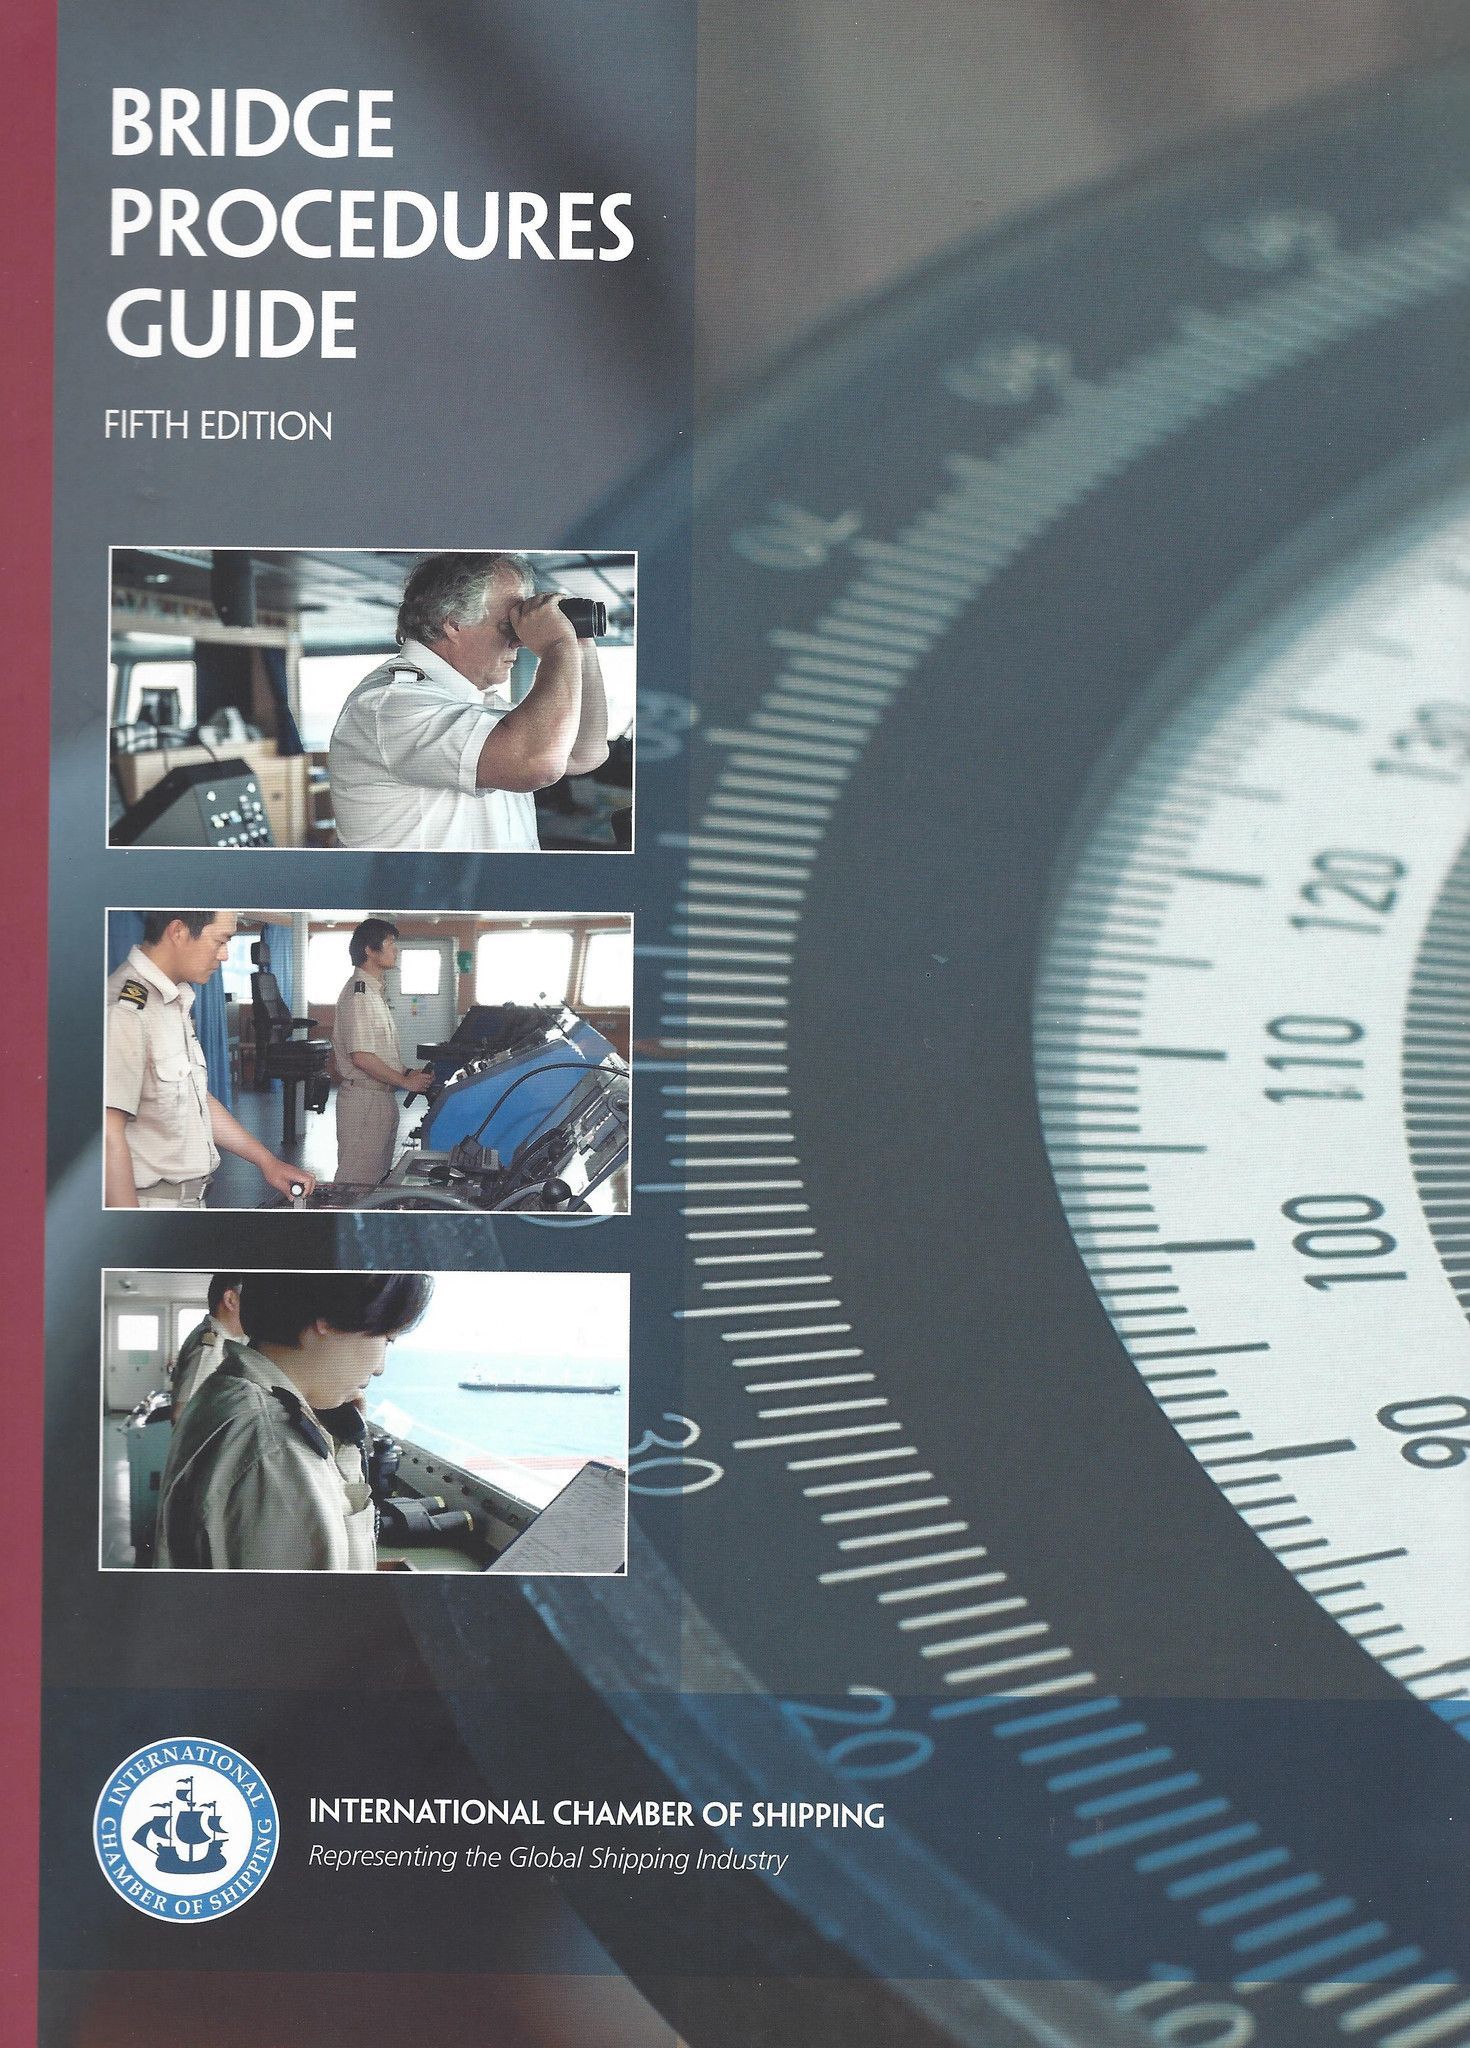 The ICS Bridge Procedures Guide is widely acknowledged as the principal industry guidance on safe bridge procedures, and is used by Masters, watchkeeping officers, companies and training institutions worldwide. The new edition continues to embrace internationally agreed standards and recommendations adopted by the IMO, and now addresses the 2010 amendments to the STCW Convention introducing enhanced Bridge Resource Management training for all officers in charge of the navigational watch. It also includes helpful bridge and emergency checklists, including comprehensive ECDIS familiarisation checklists. Particular attention has also been given to the importance of the passage planning process, including the safe and effective use of technology.